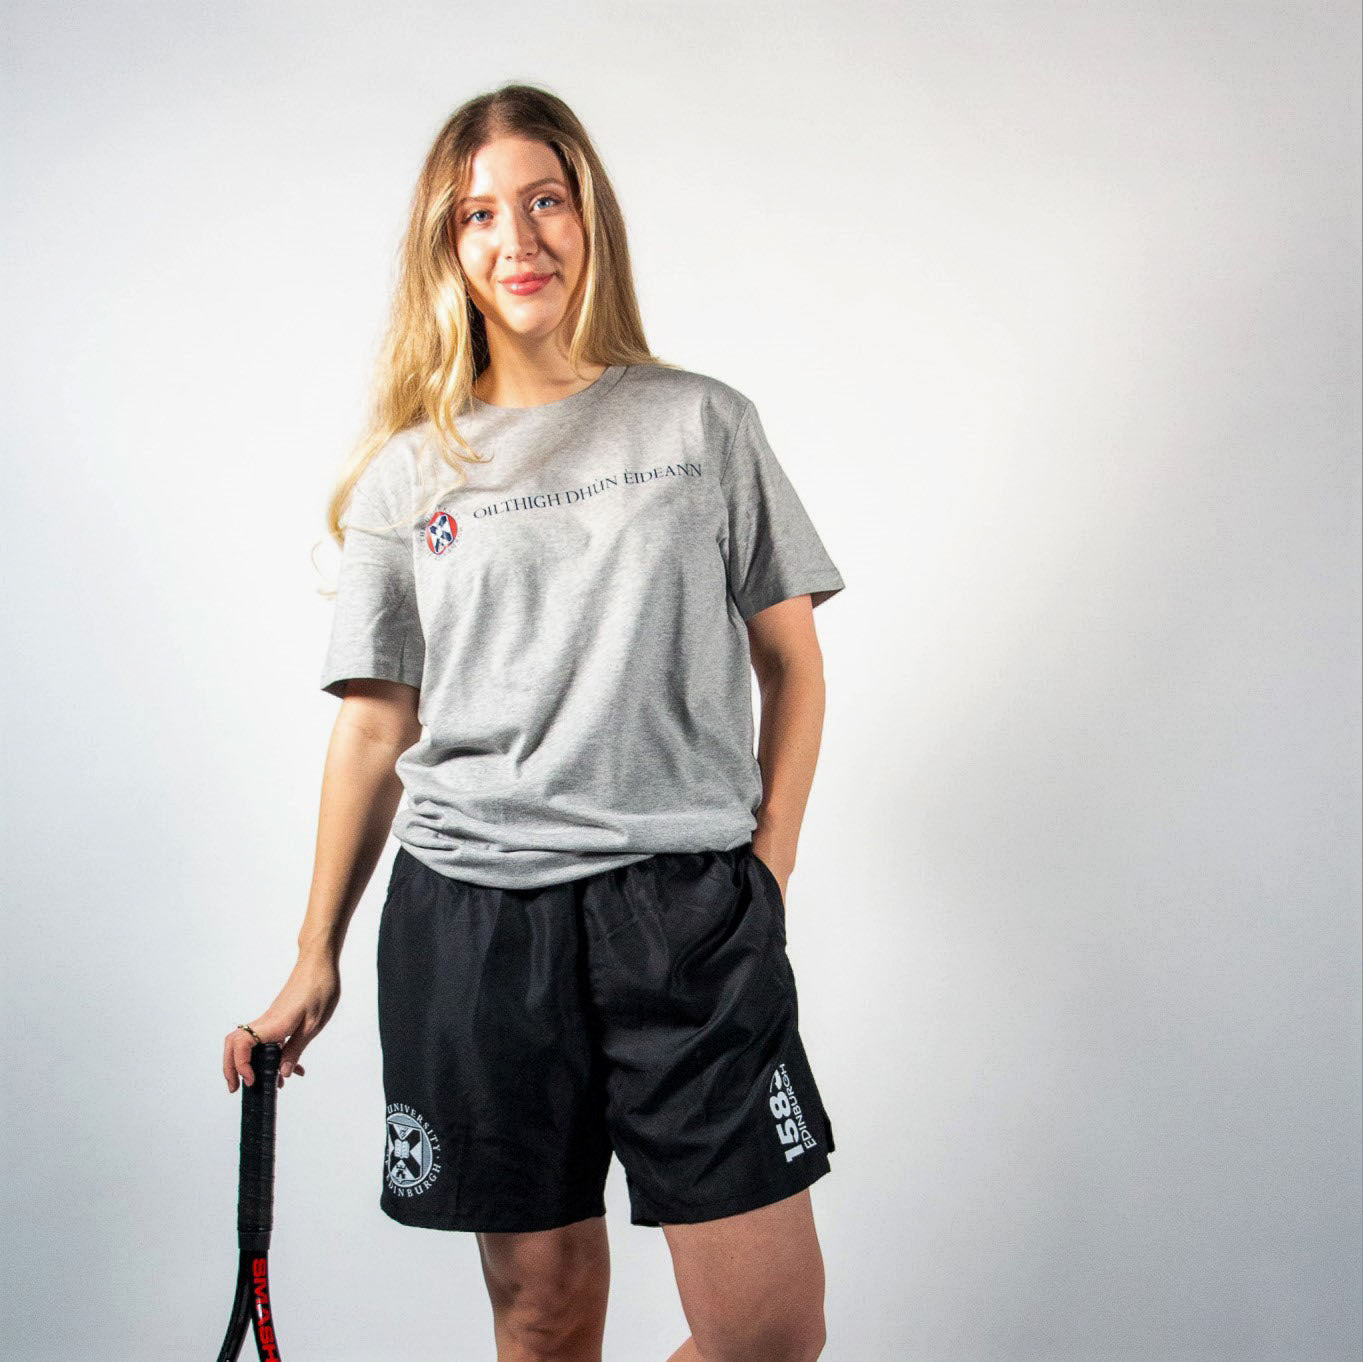 our model wears the university running shorts in black and the gaelic t-shirt in heather grey